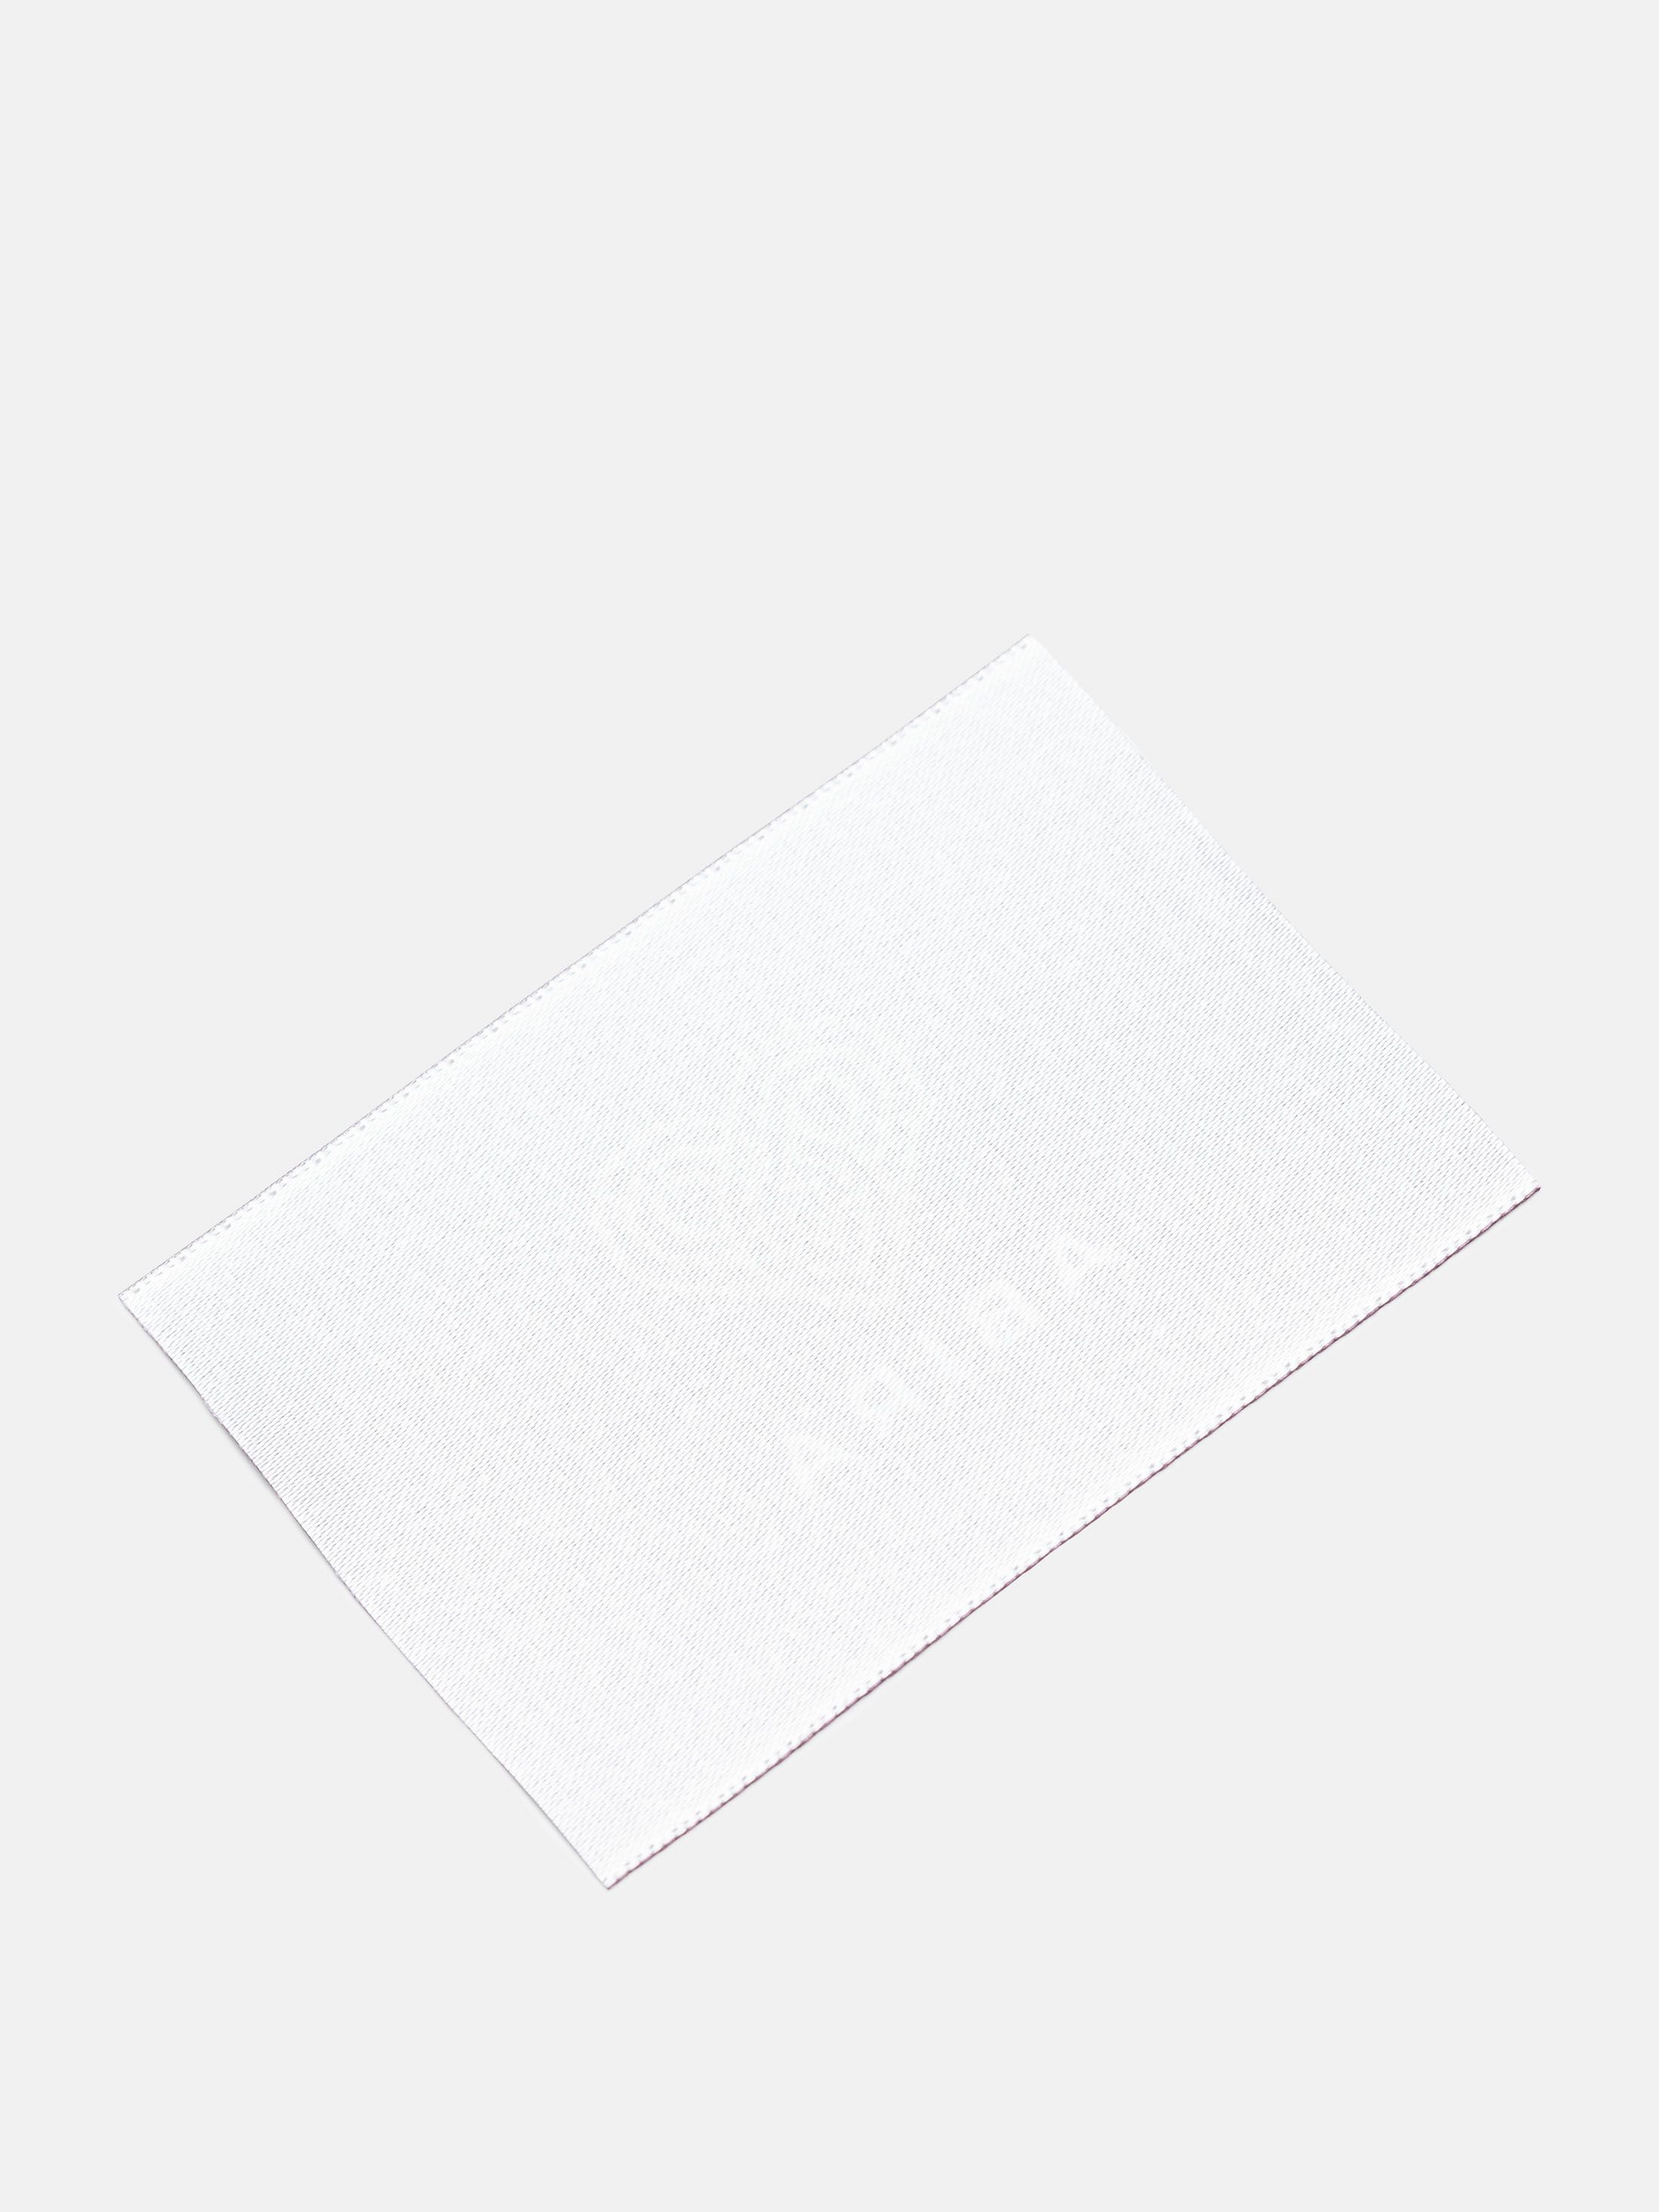 fabric brand labels back